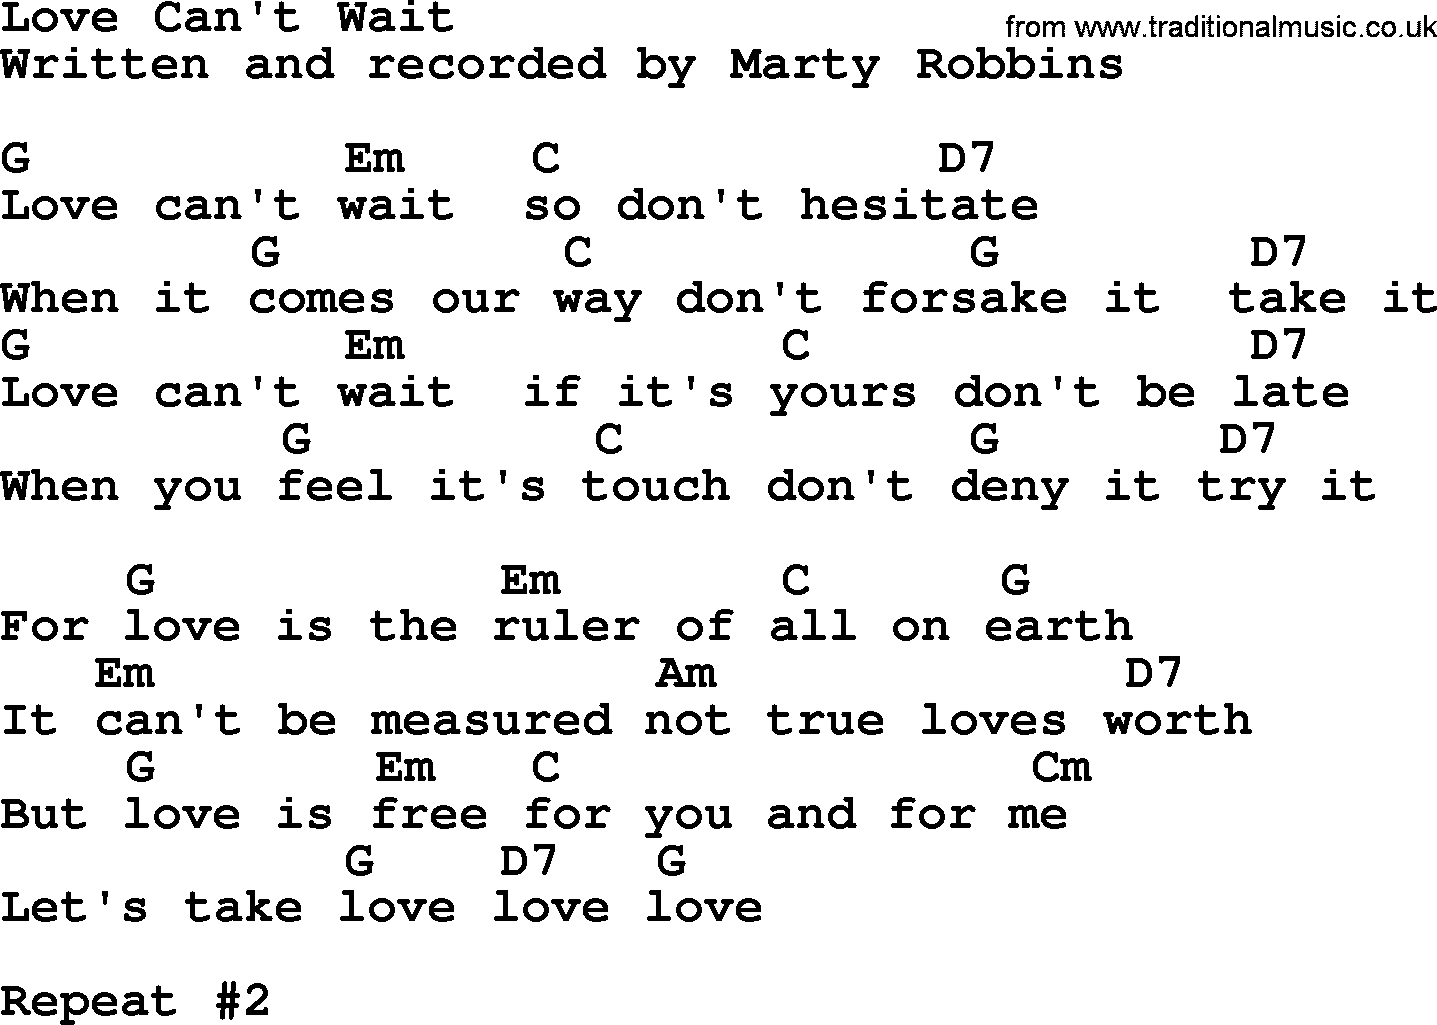 Marty Robbins song: Love Can't Wait, lyrics and chords